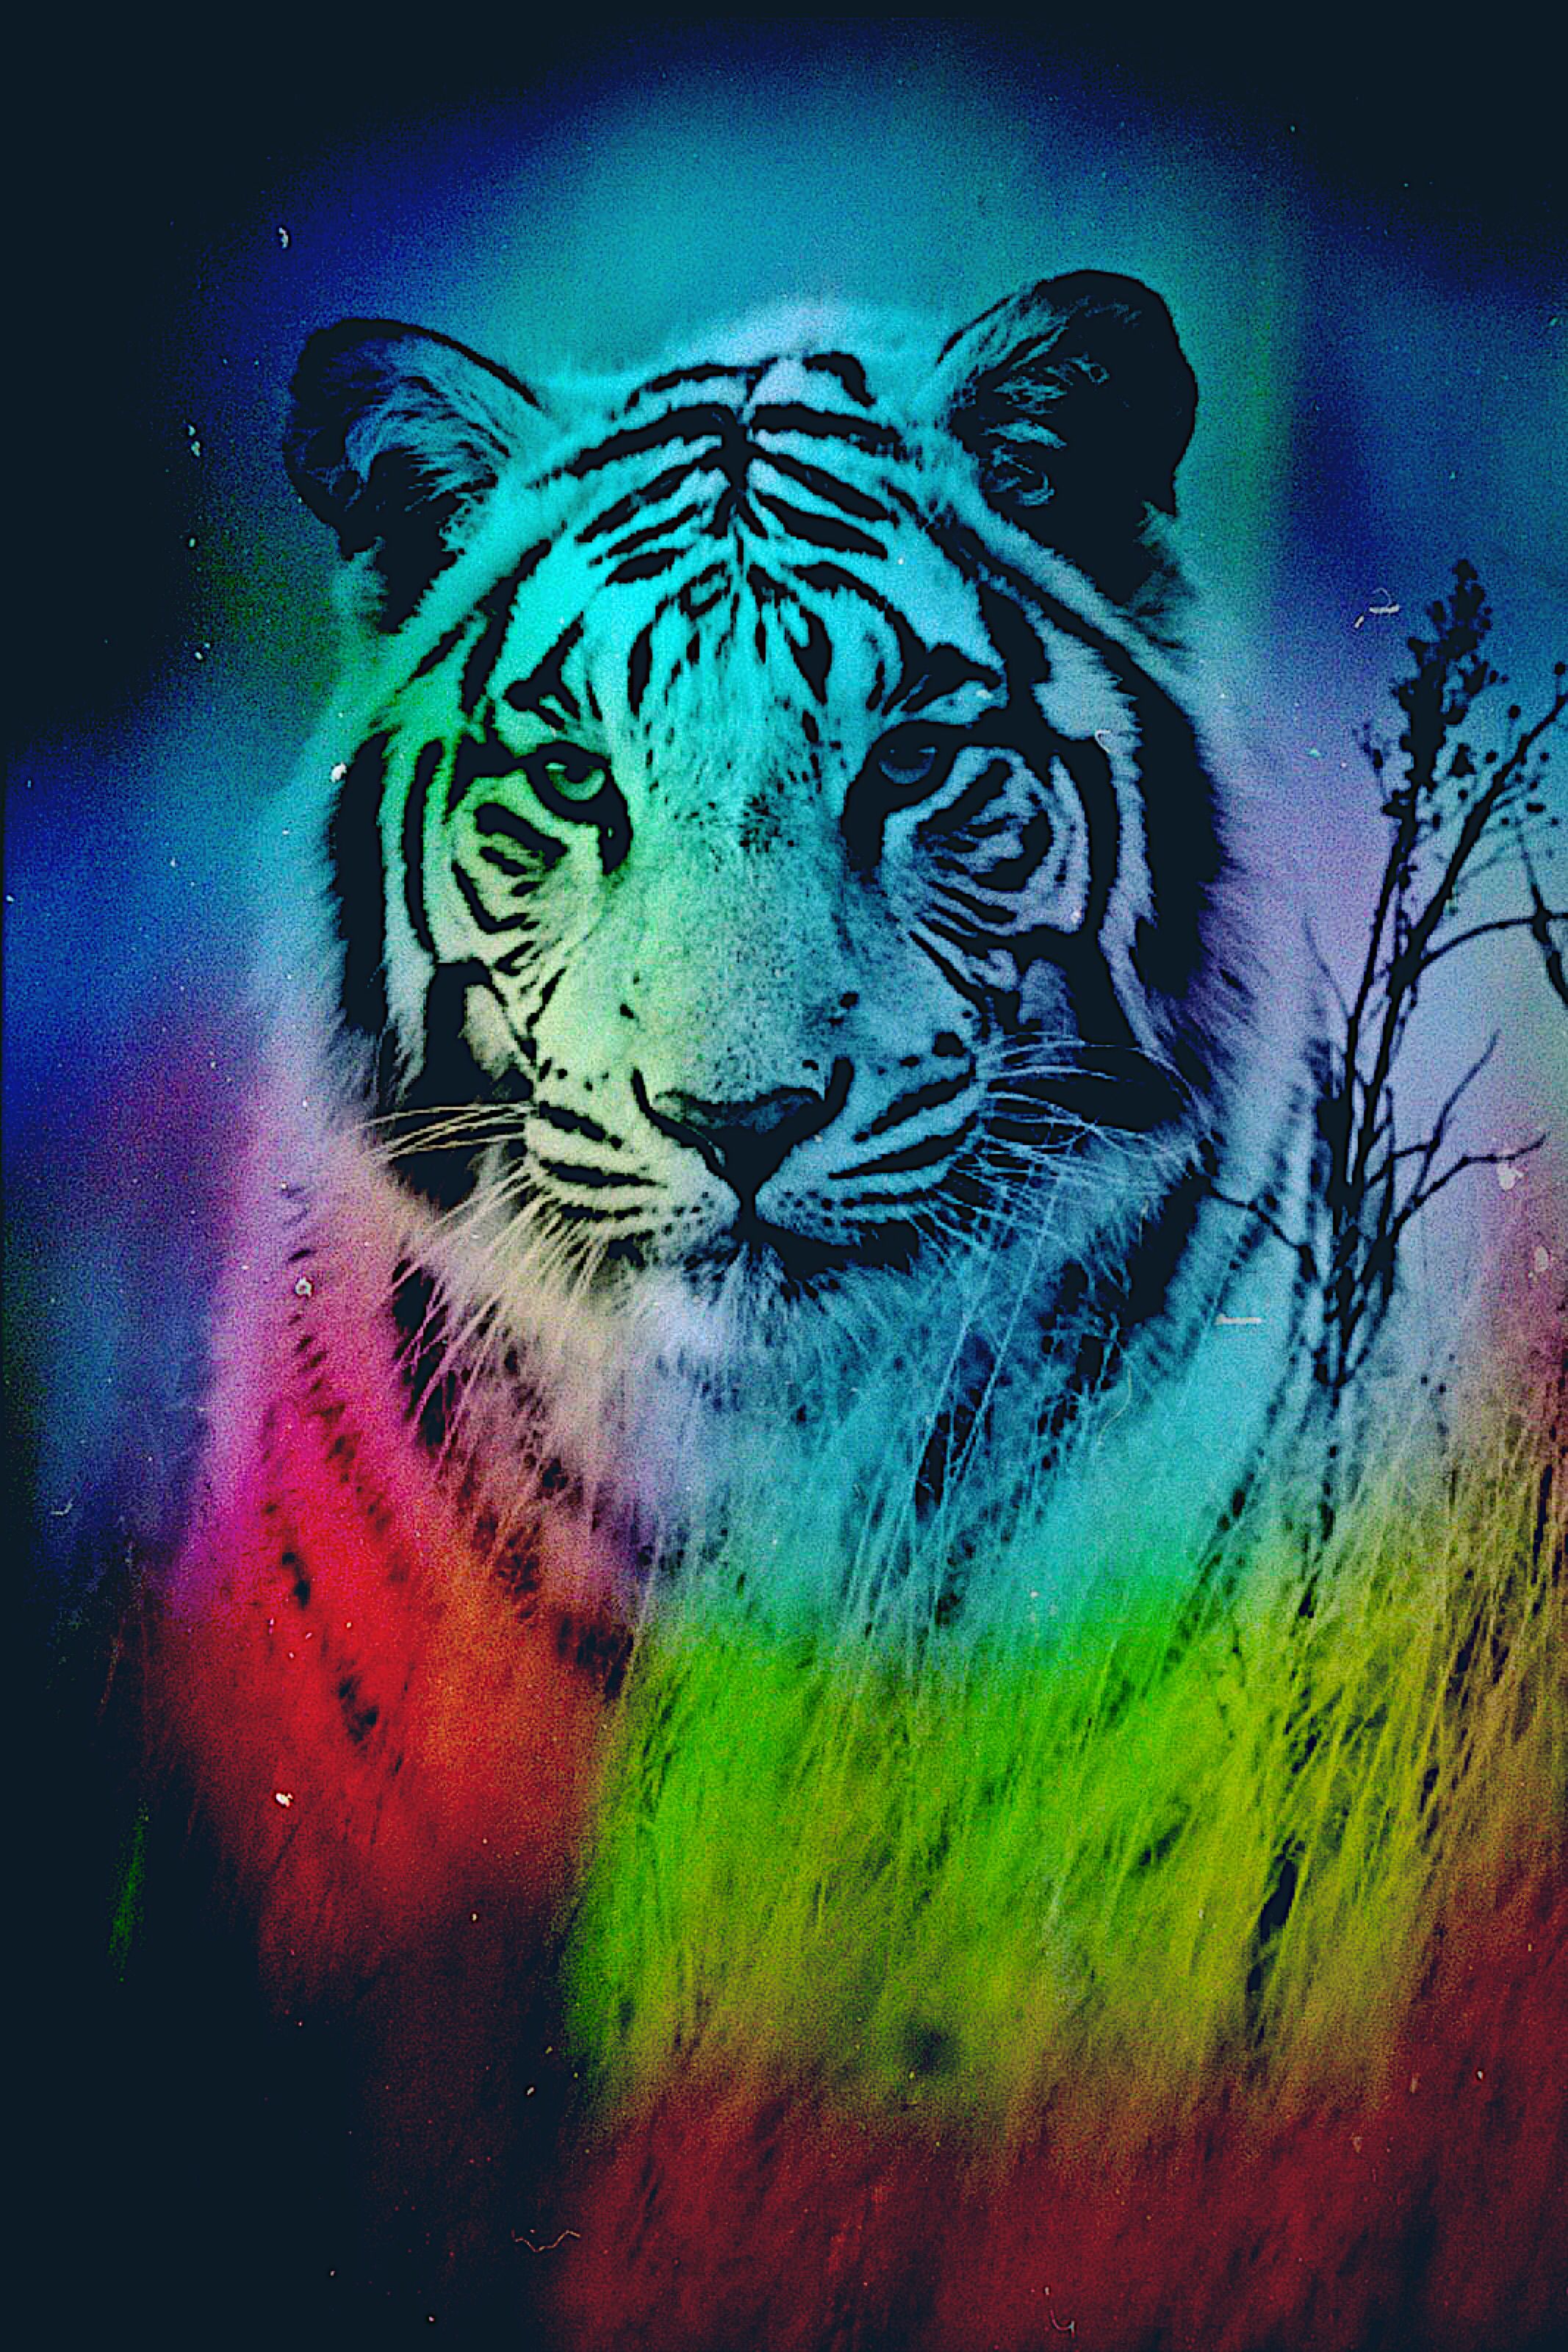 Rainbow tiger picture. Tiger picture, Big cats art, Canvas art projects